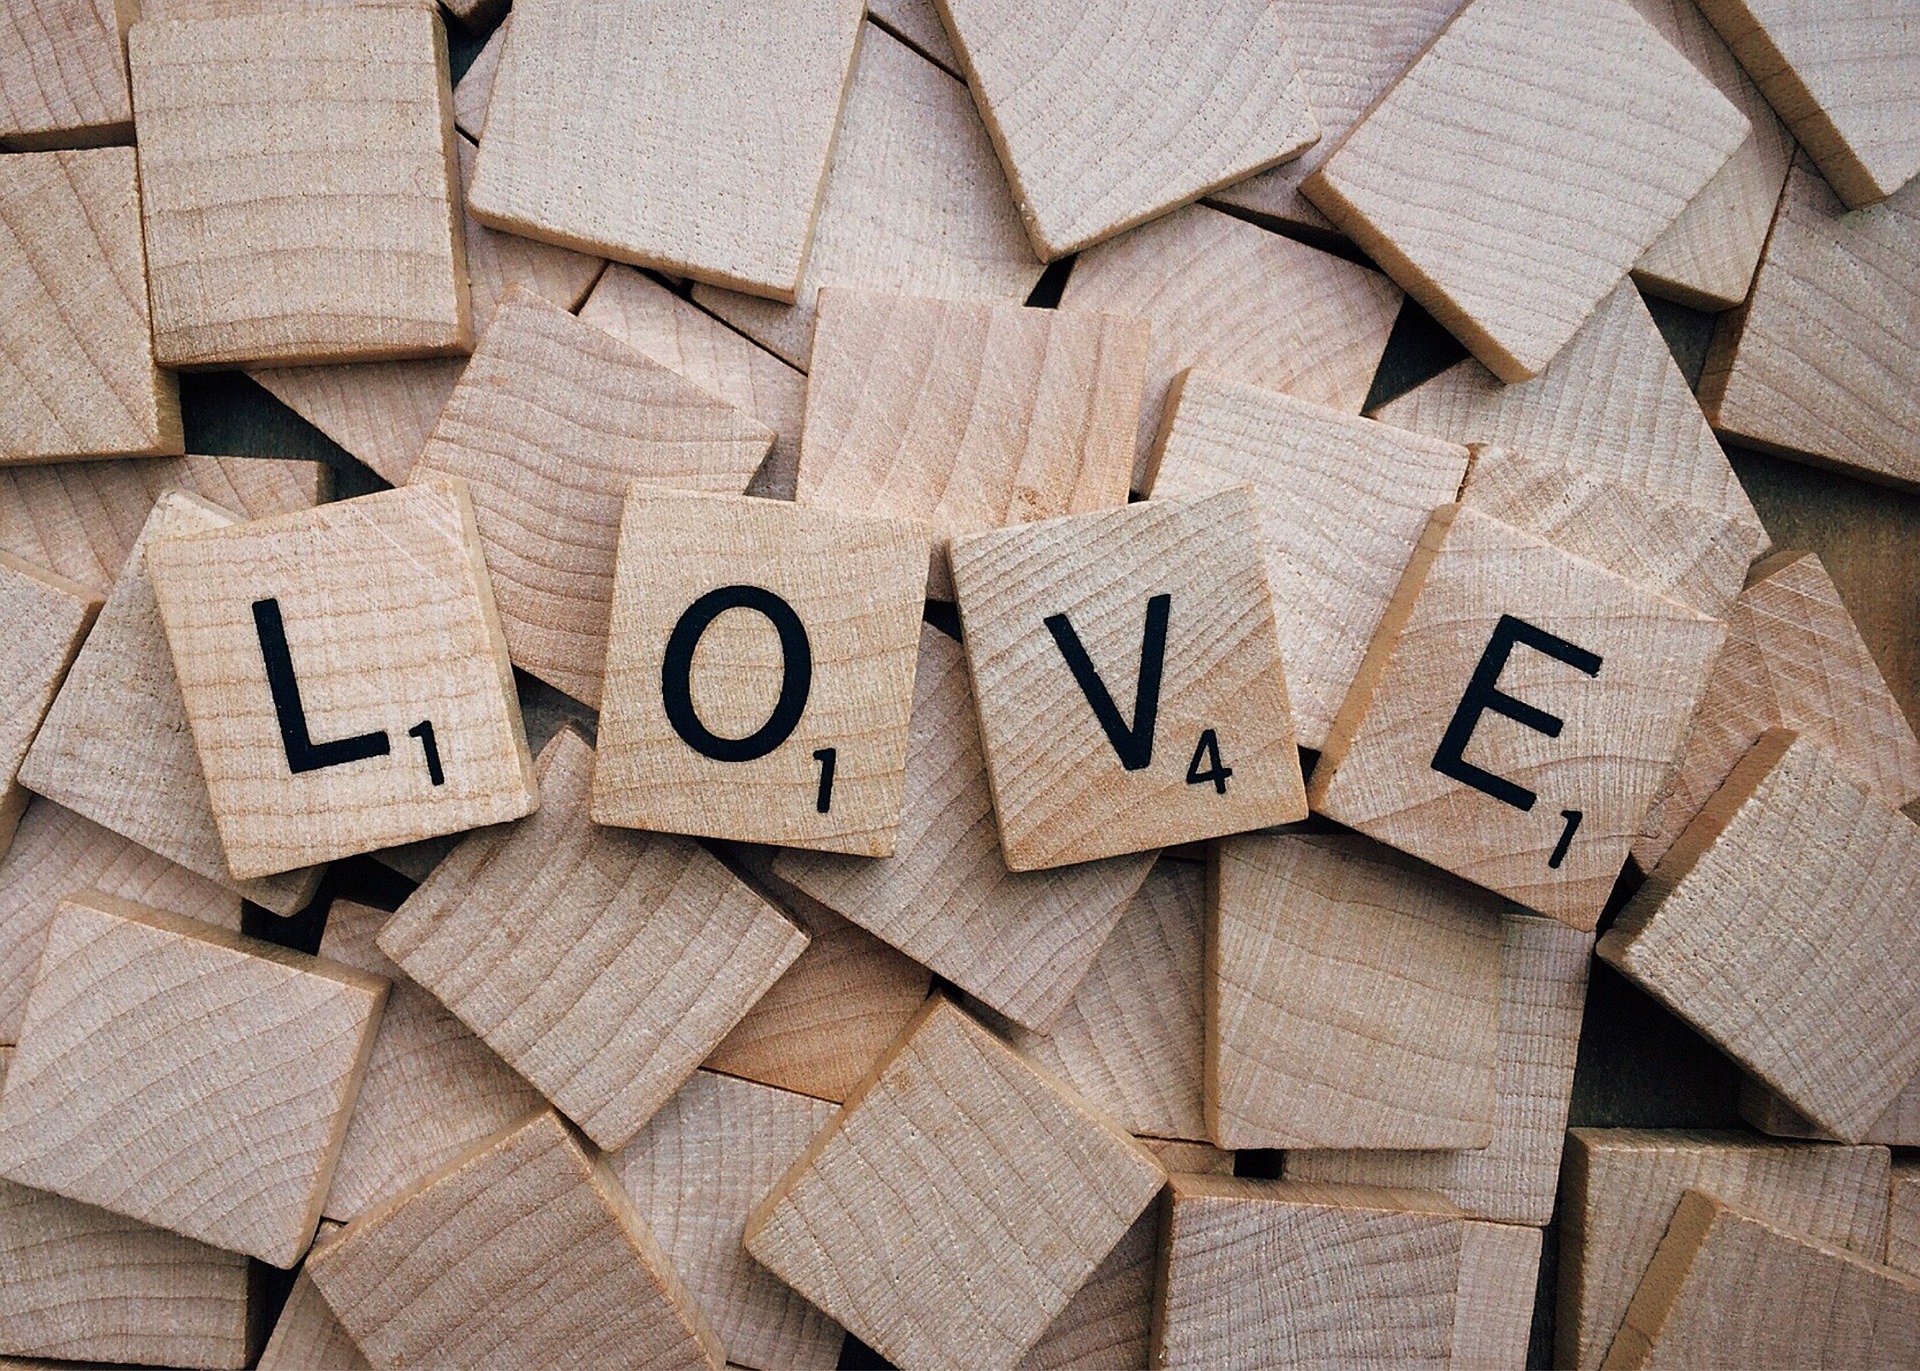 Image of scrabble pieces spelling out LOVE